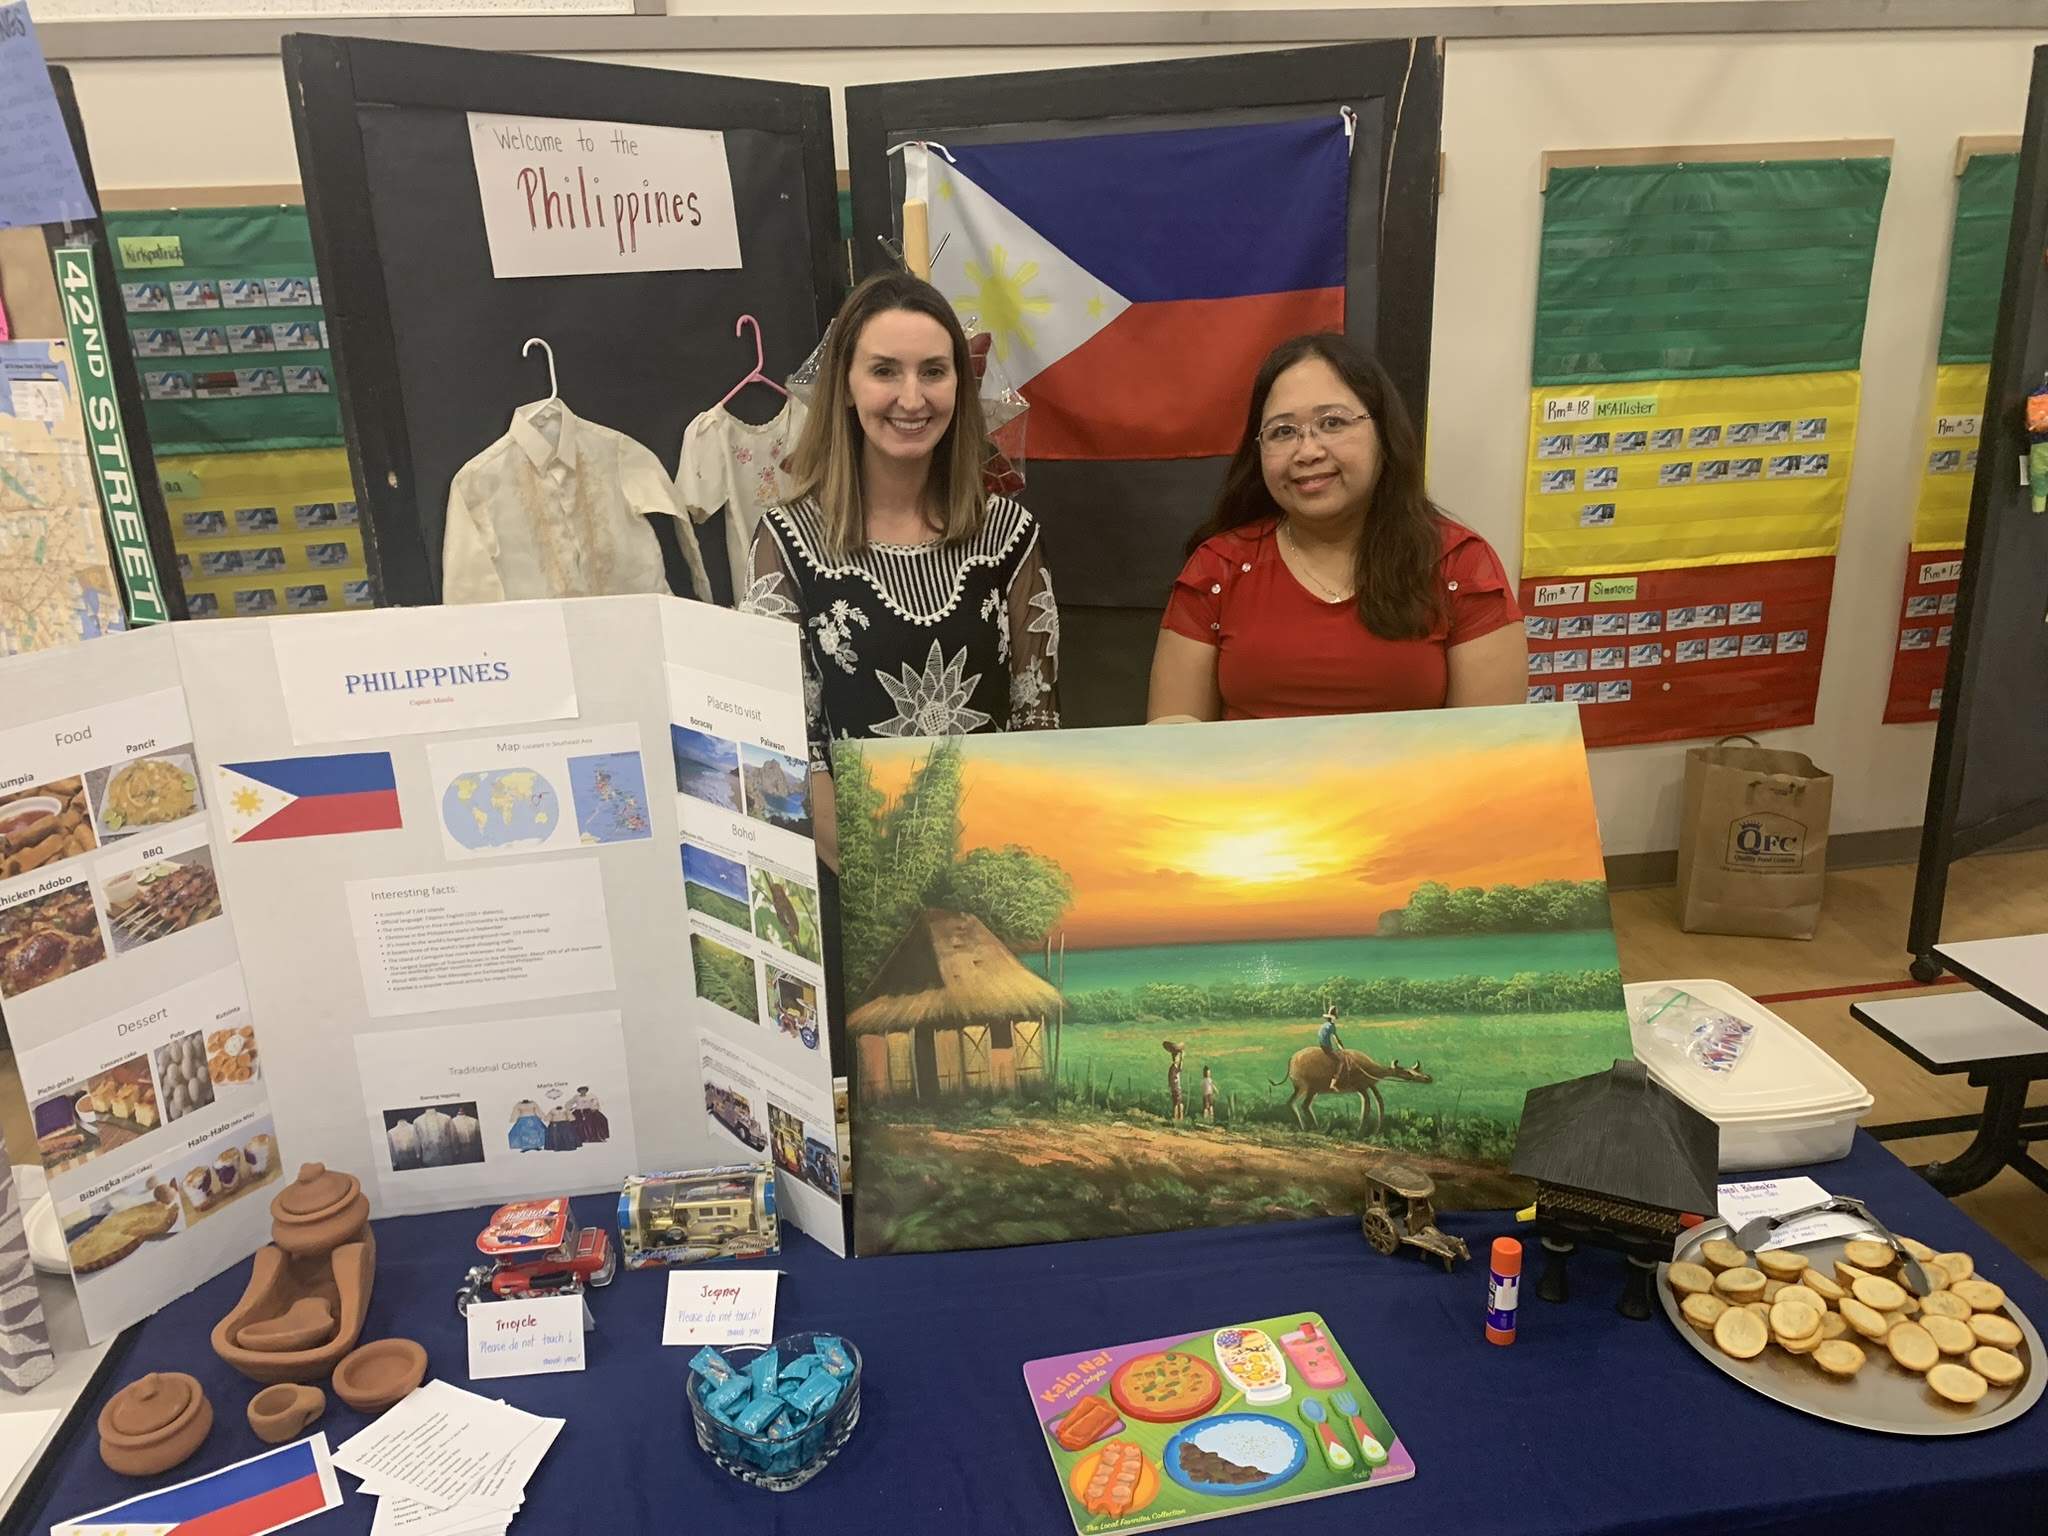 Festival of Cultures booth displays